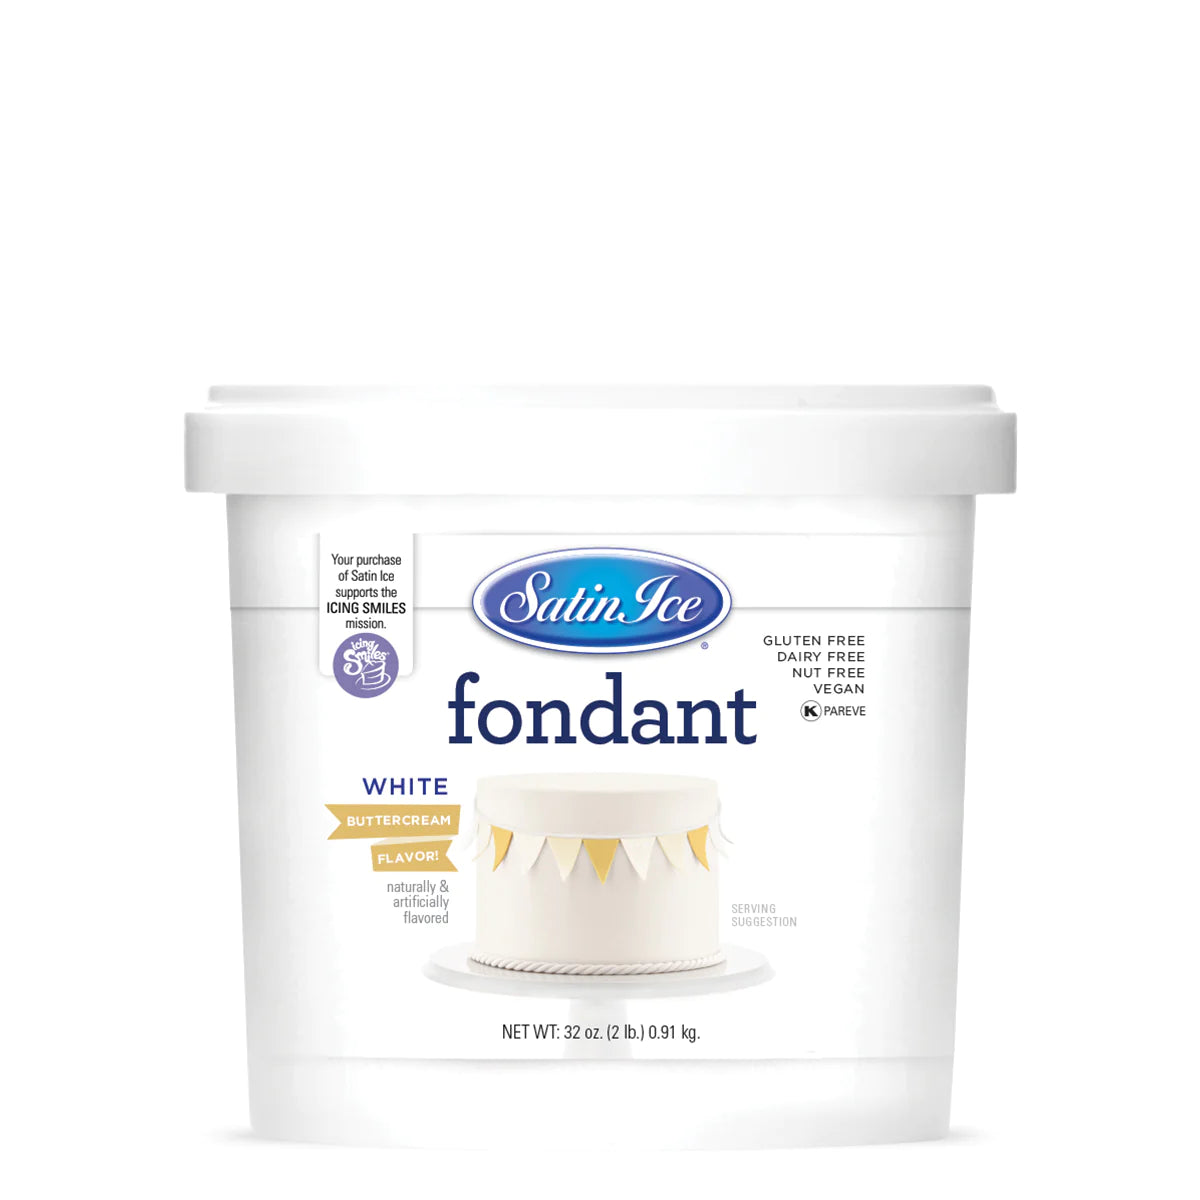 White Colored and Buttercream Flavored Fondant in a 2 Pound Container